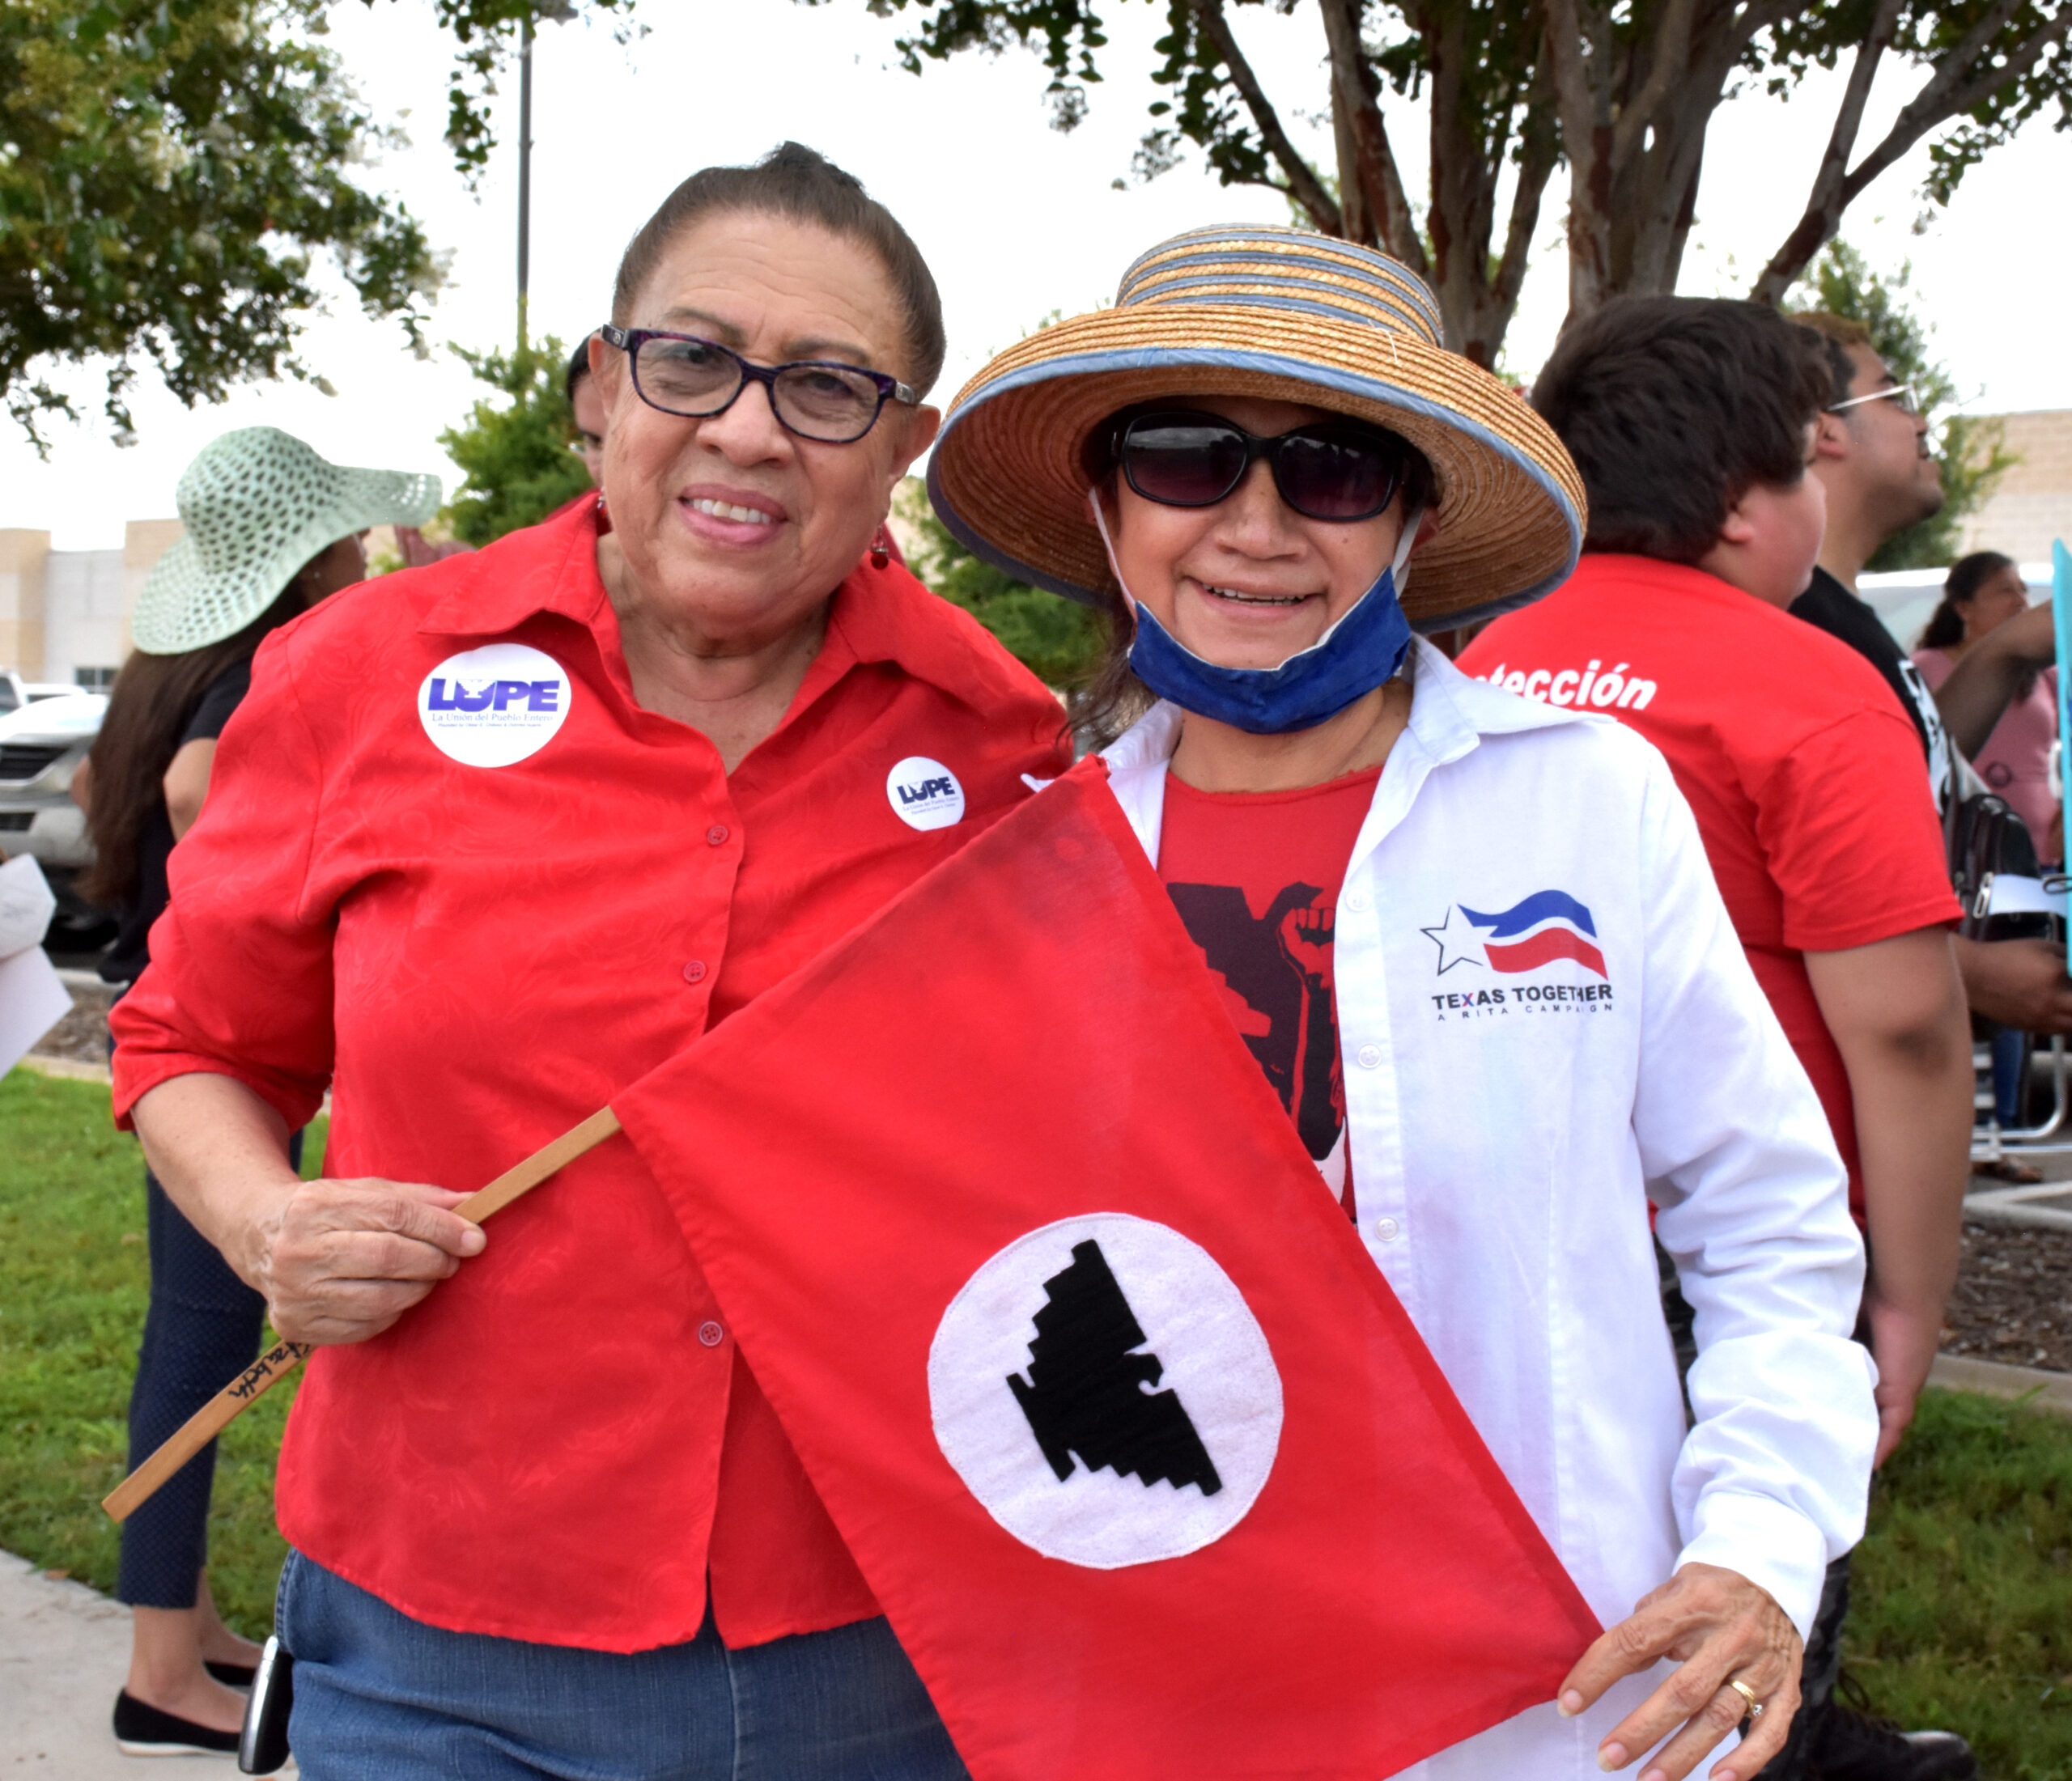 Juanita stands next to Martha, together they hold a red and black UFW union flag